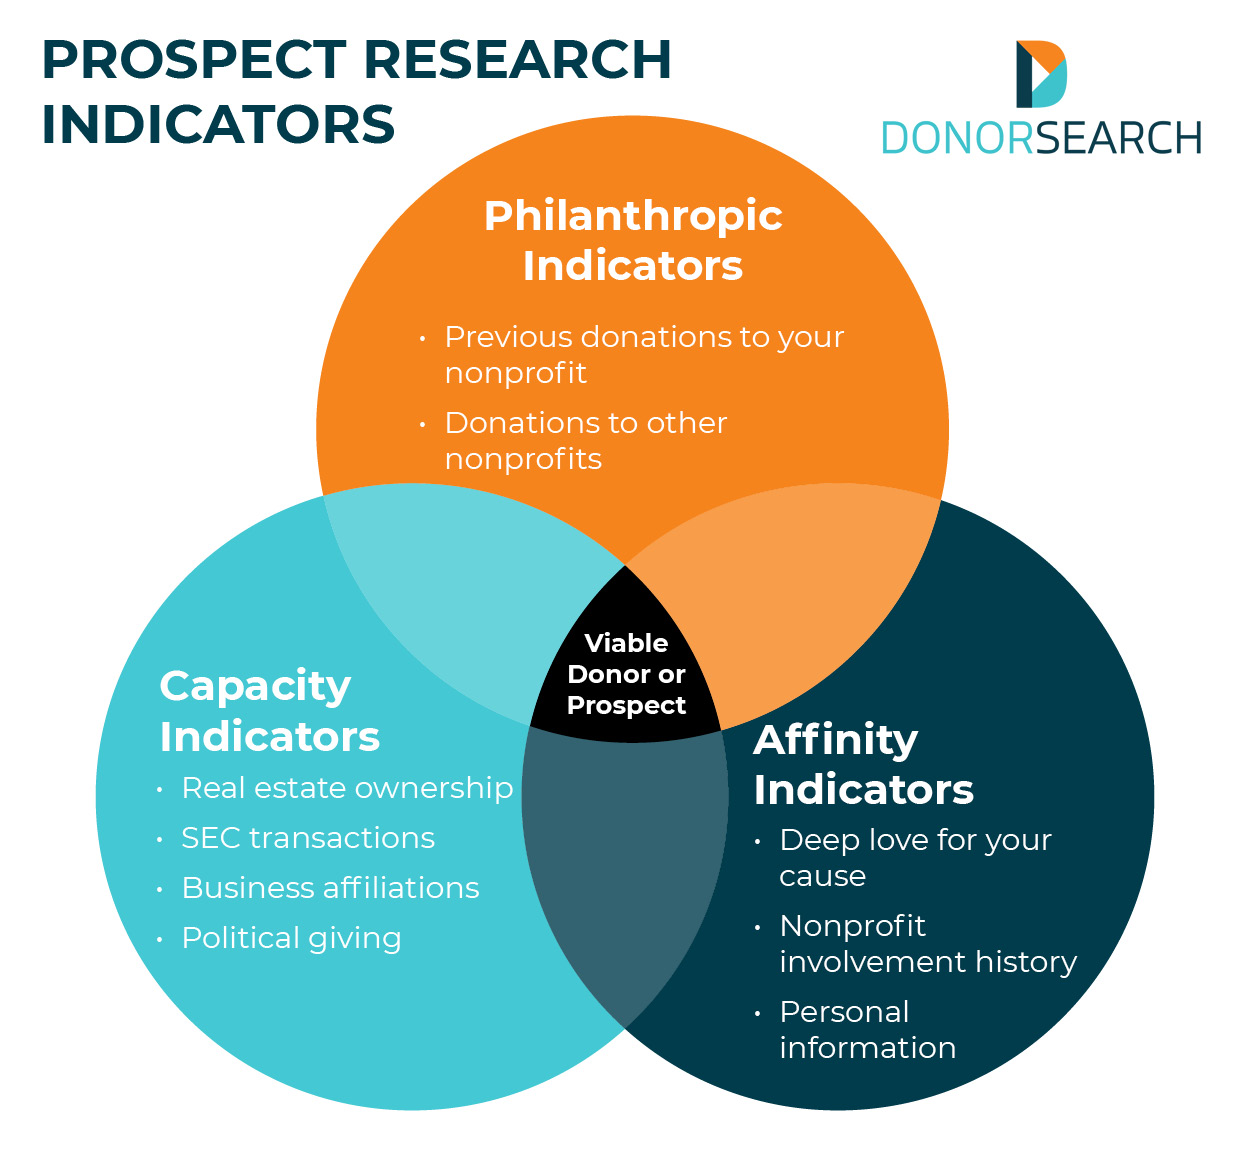 This image gives examples of the three different types of prospect research markers, all of which are discussed below.